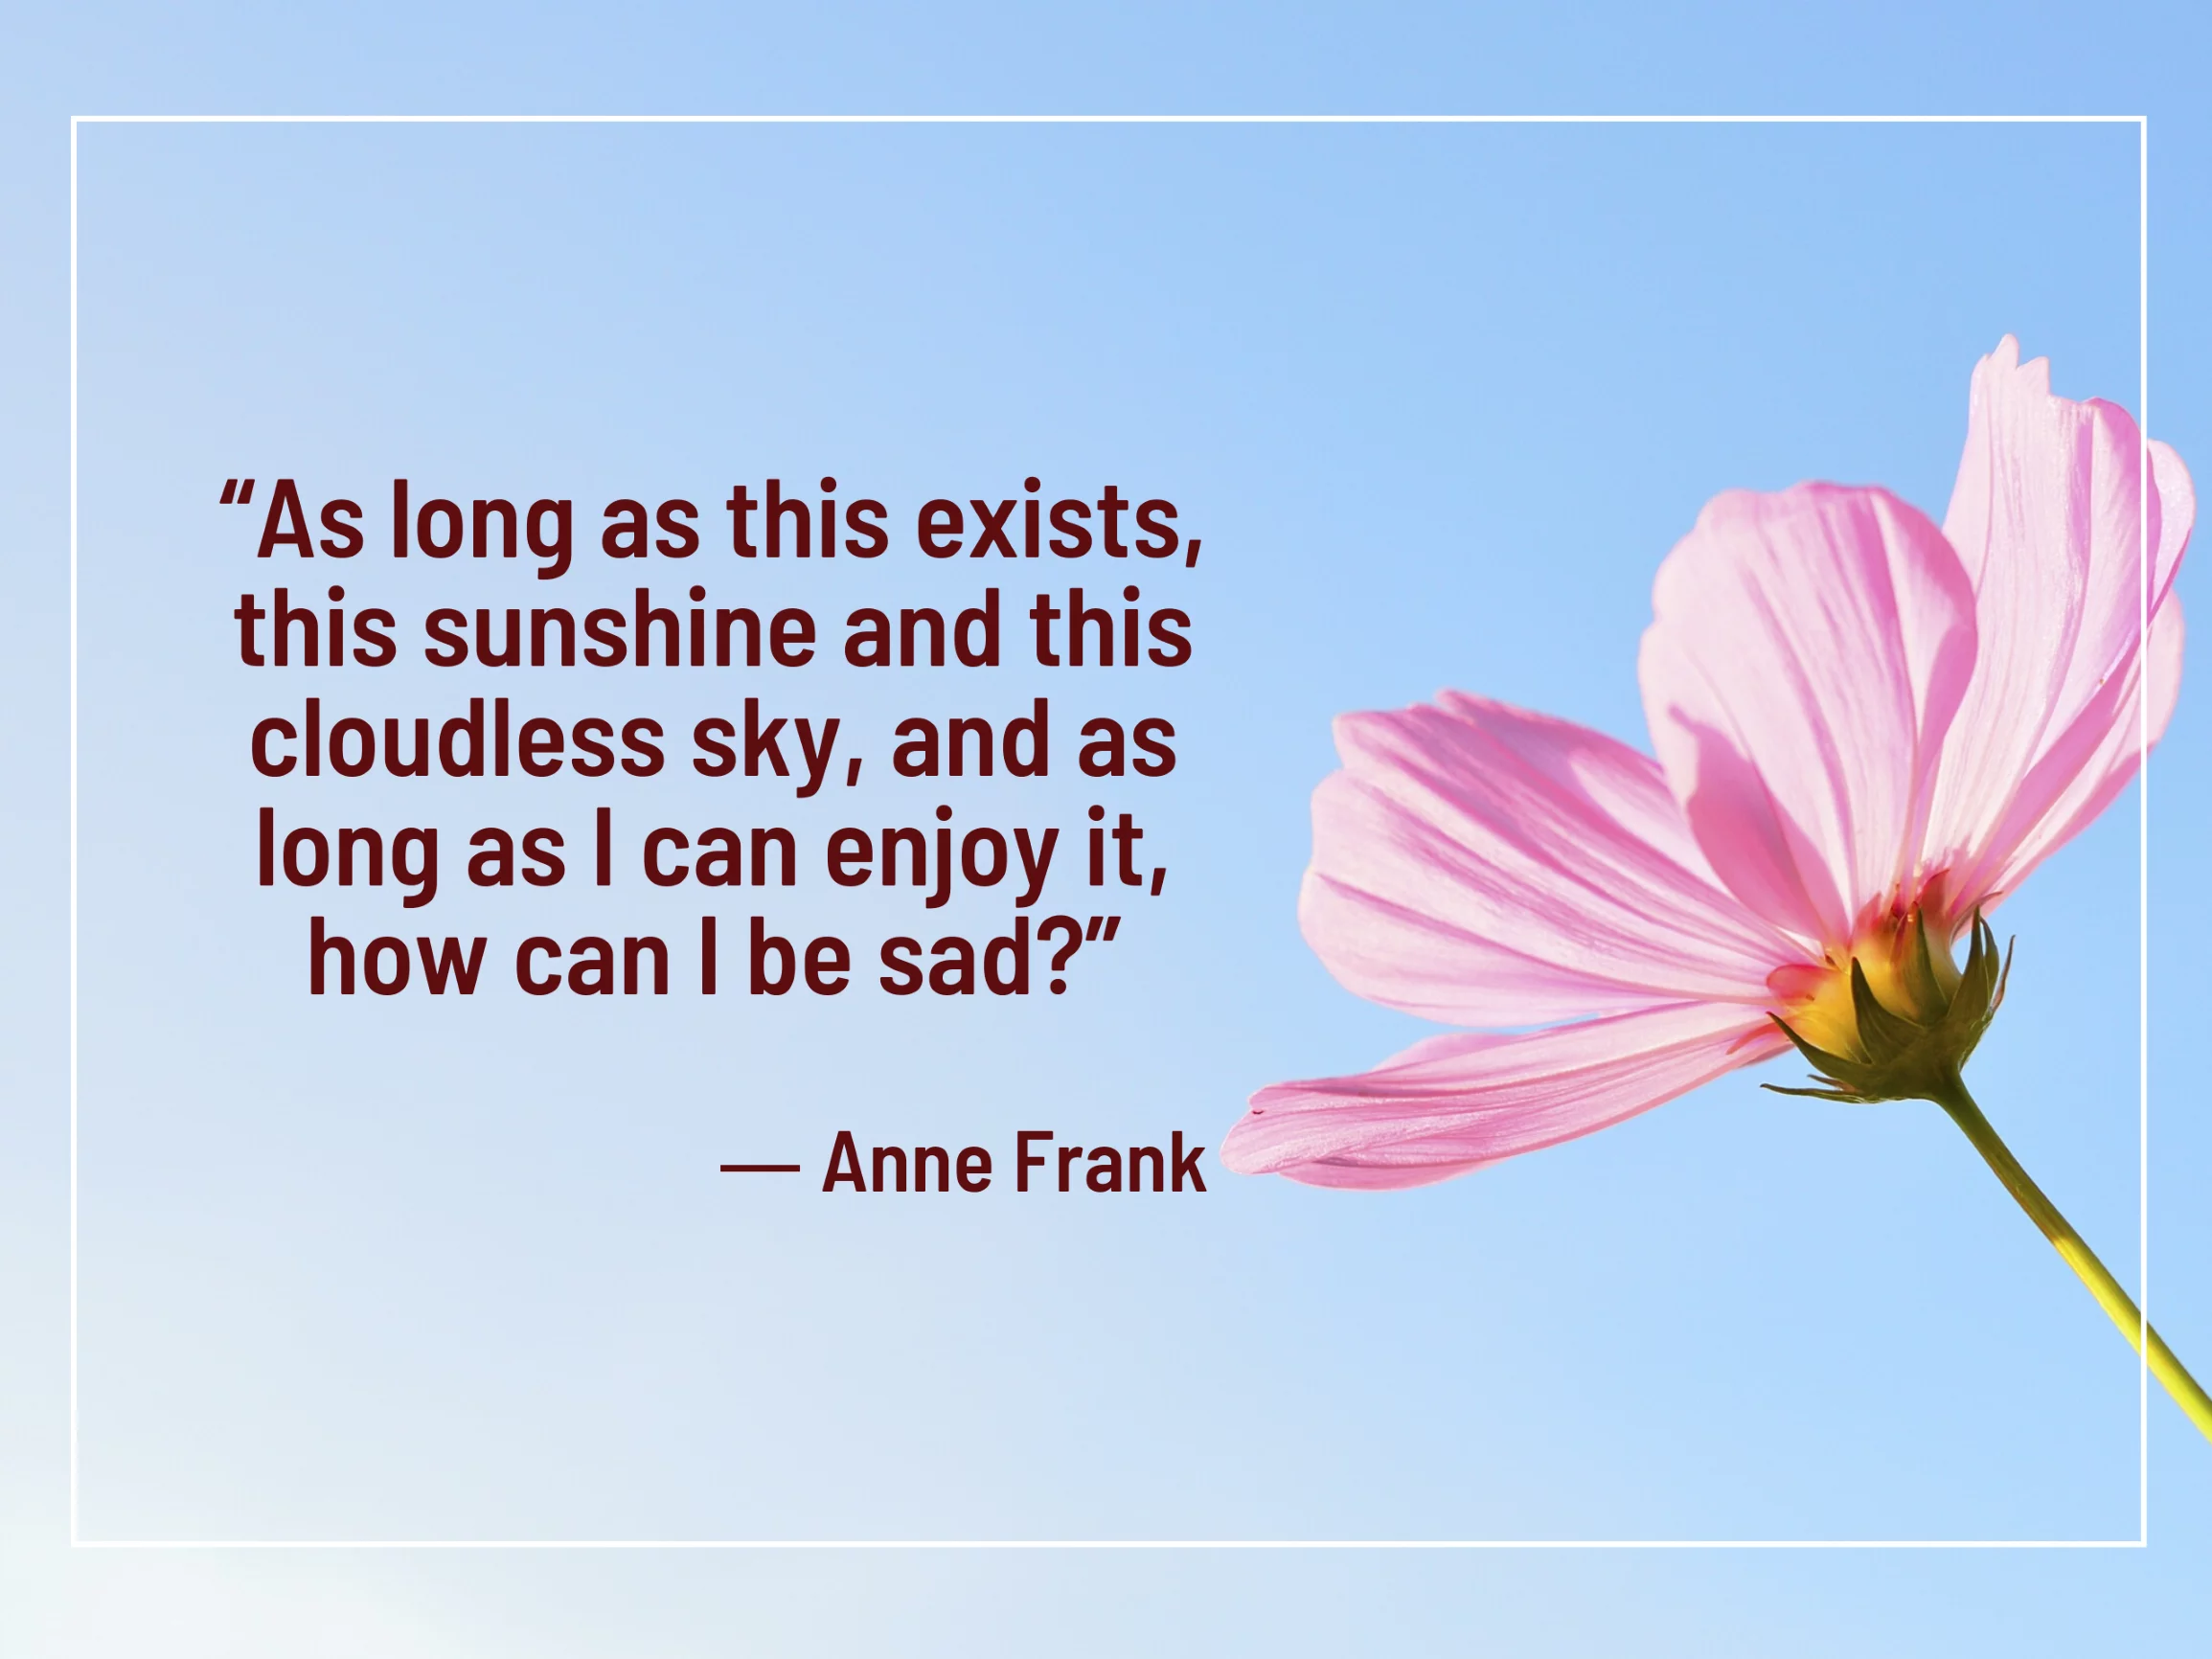 Anne Frank says there's always something to be grateful for